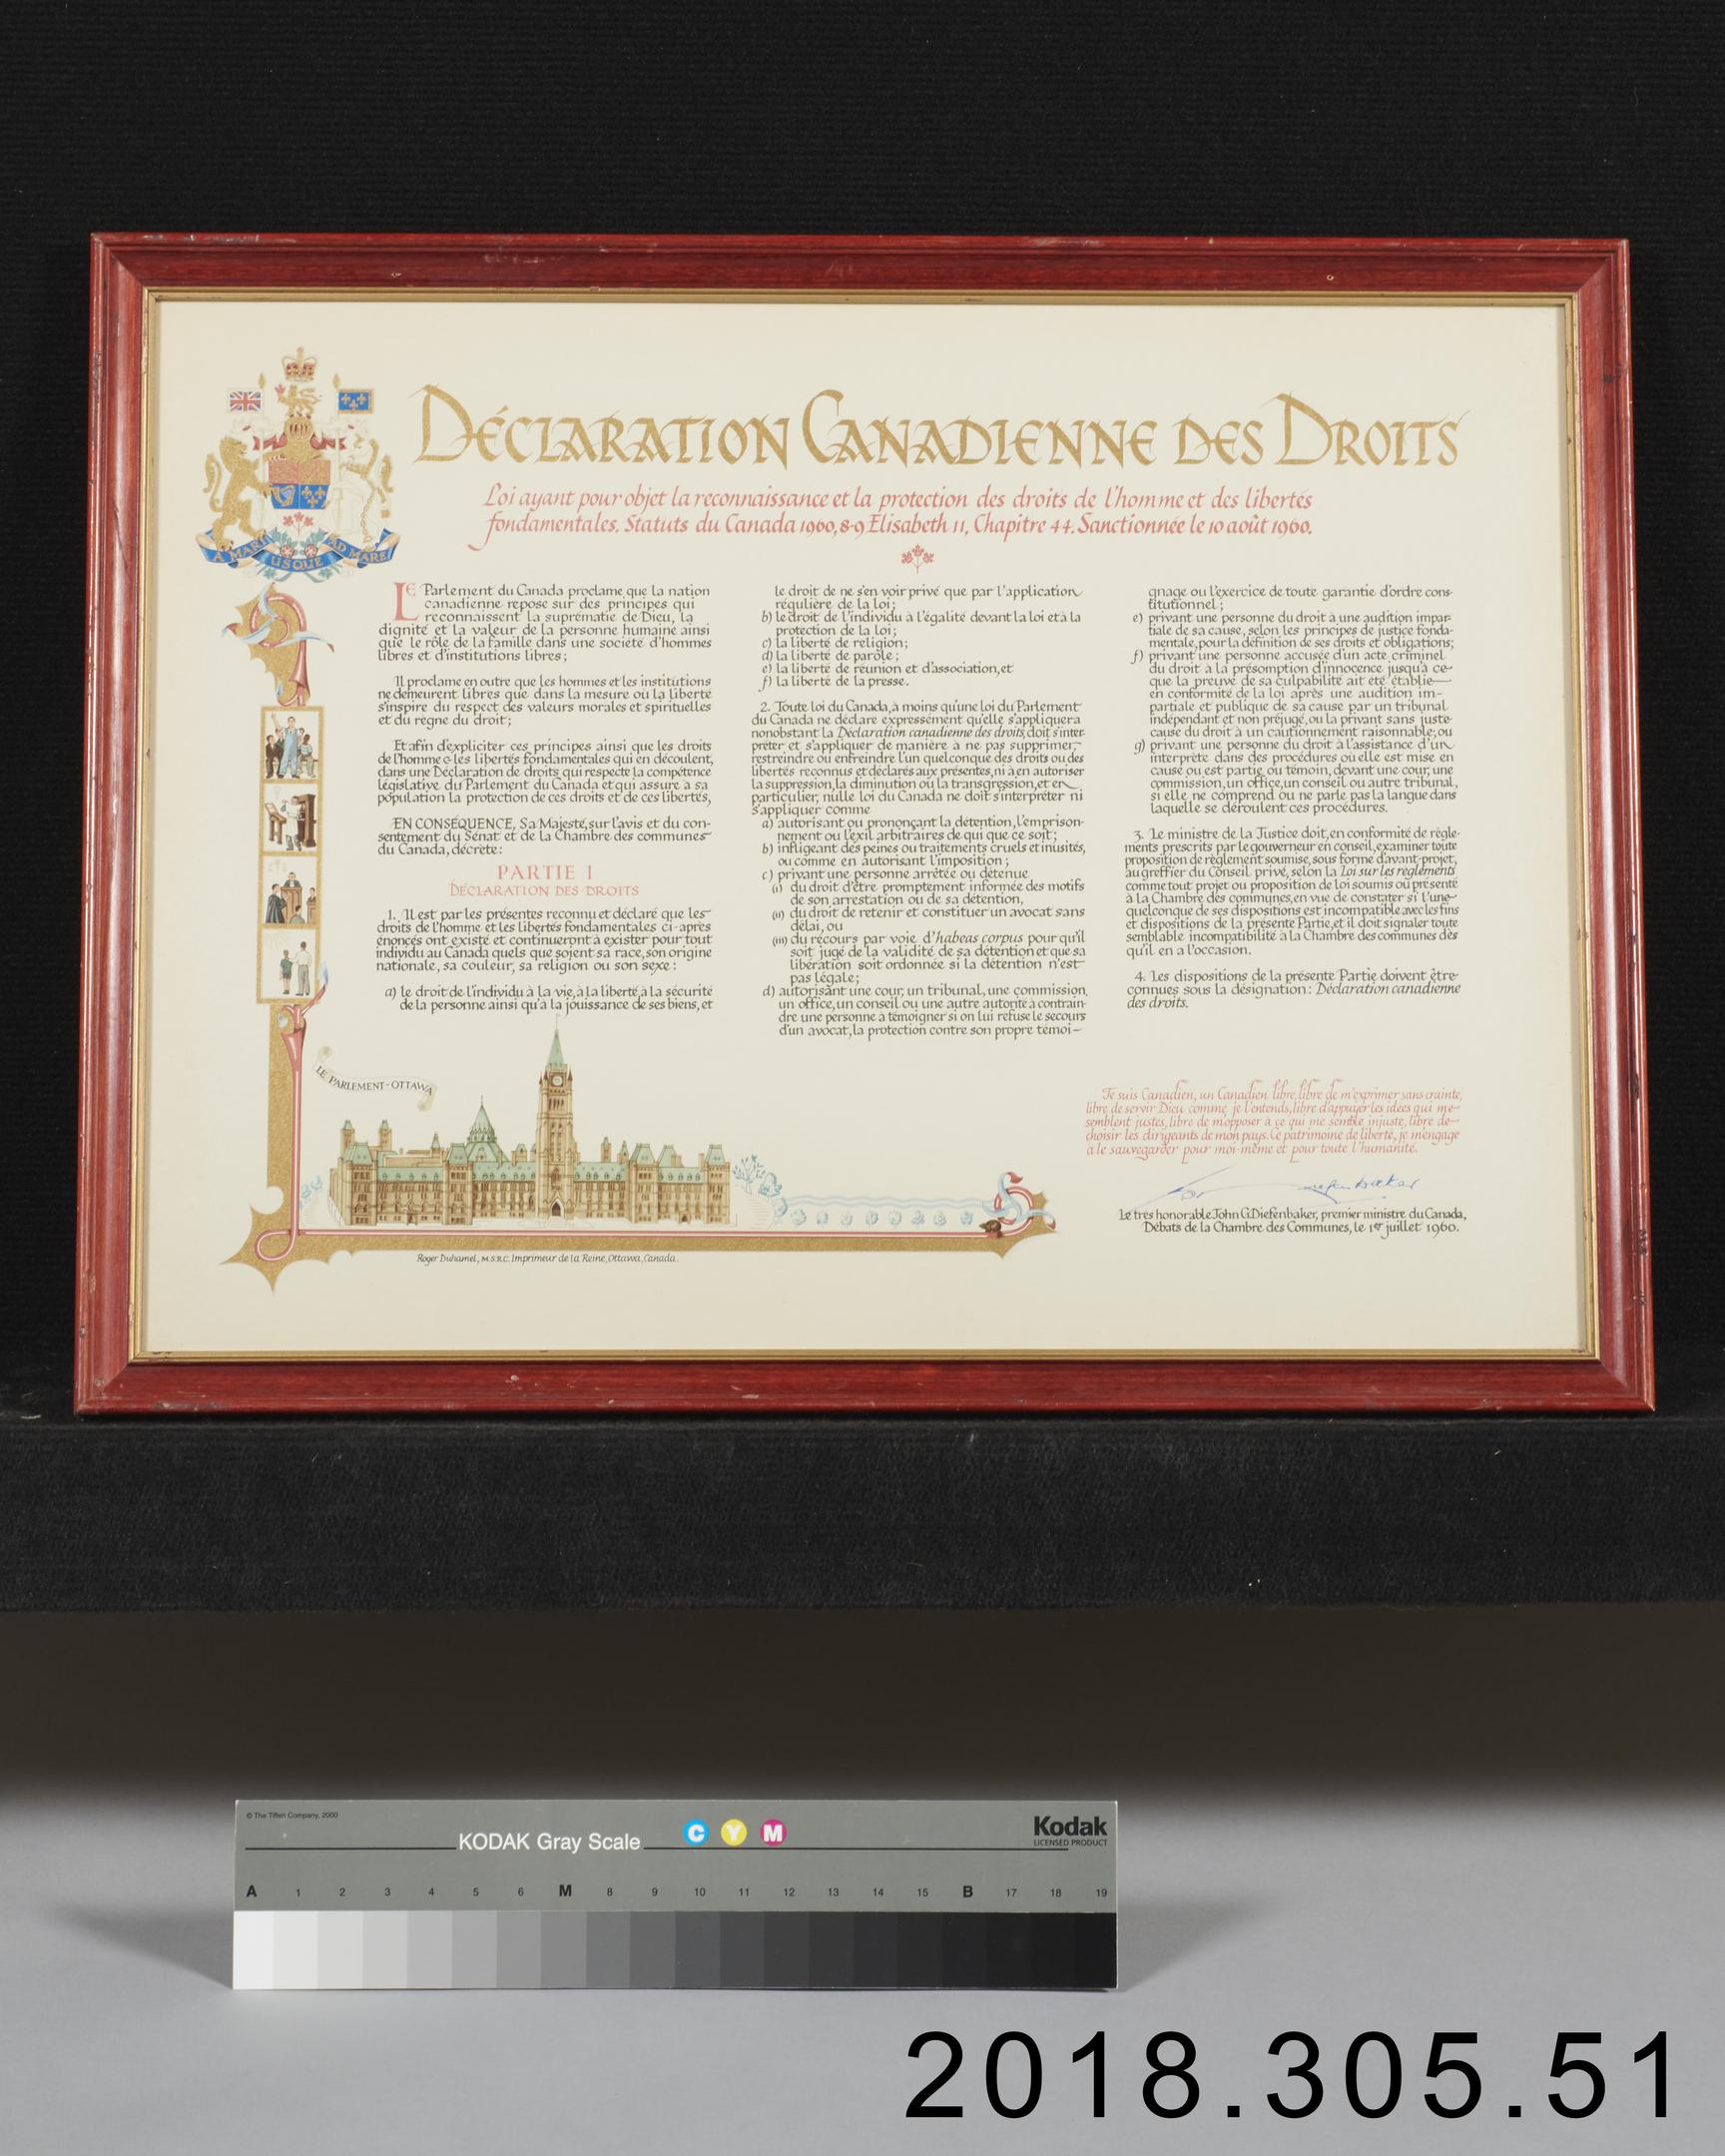 certificate, Canadian Bill of Rights